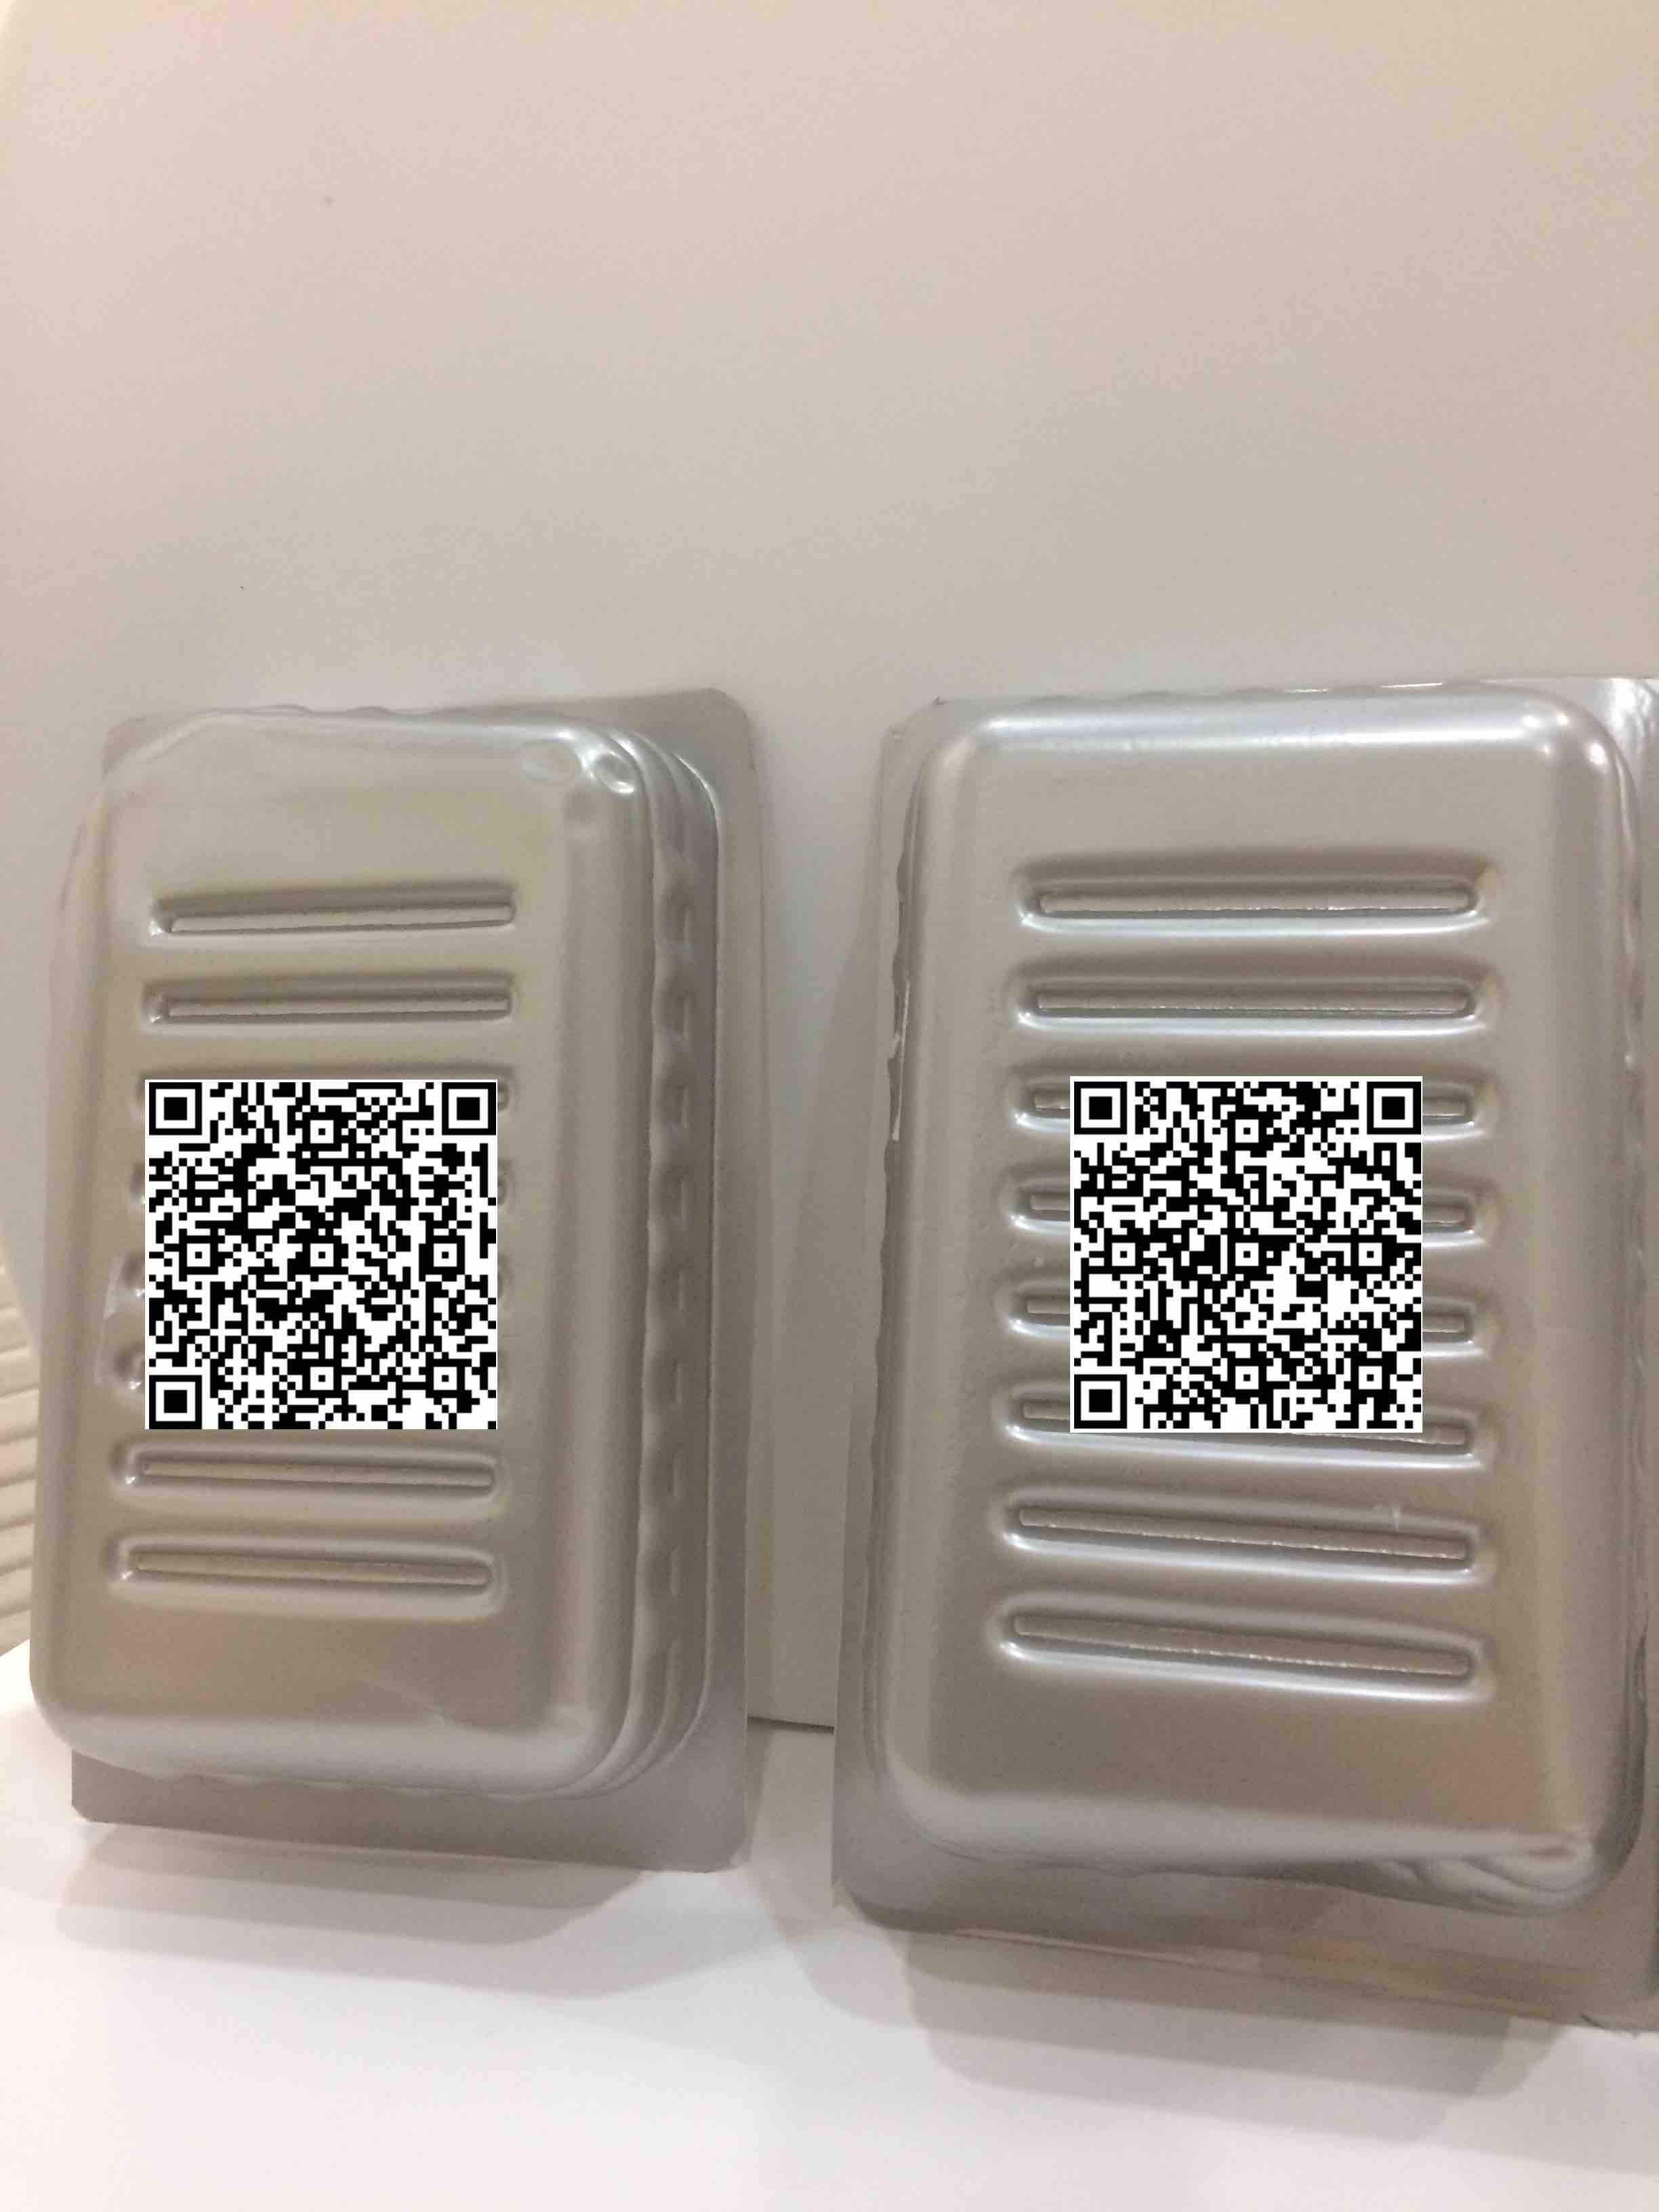 packages with qr codes